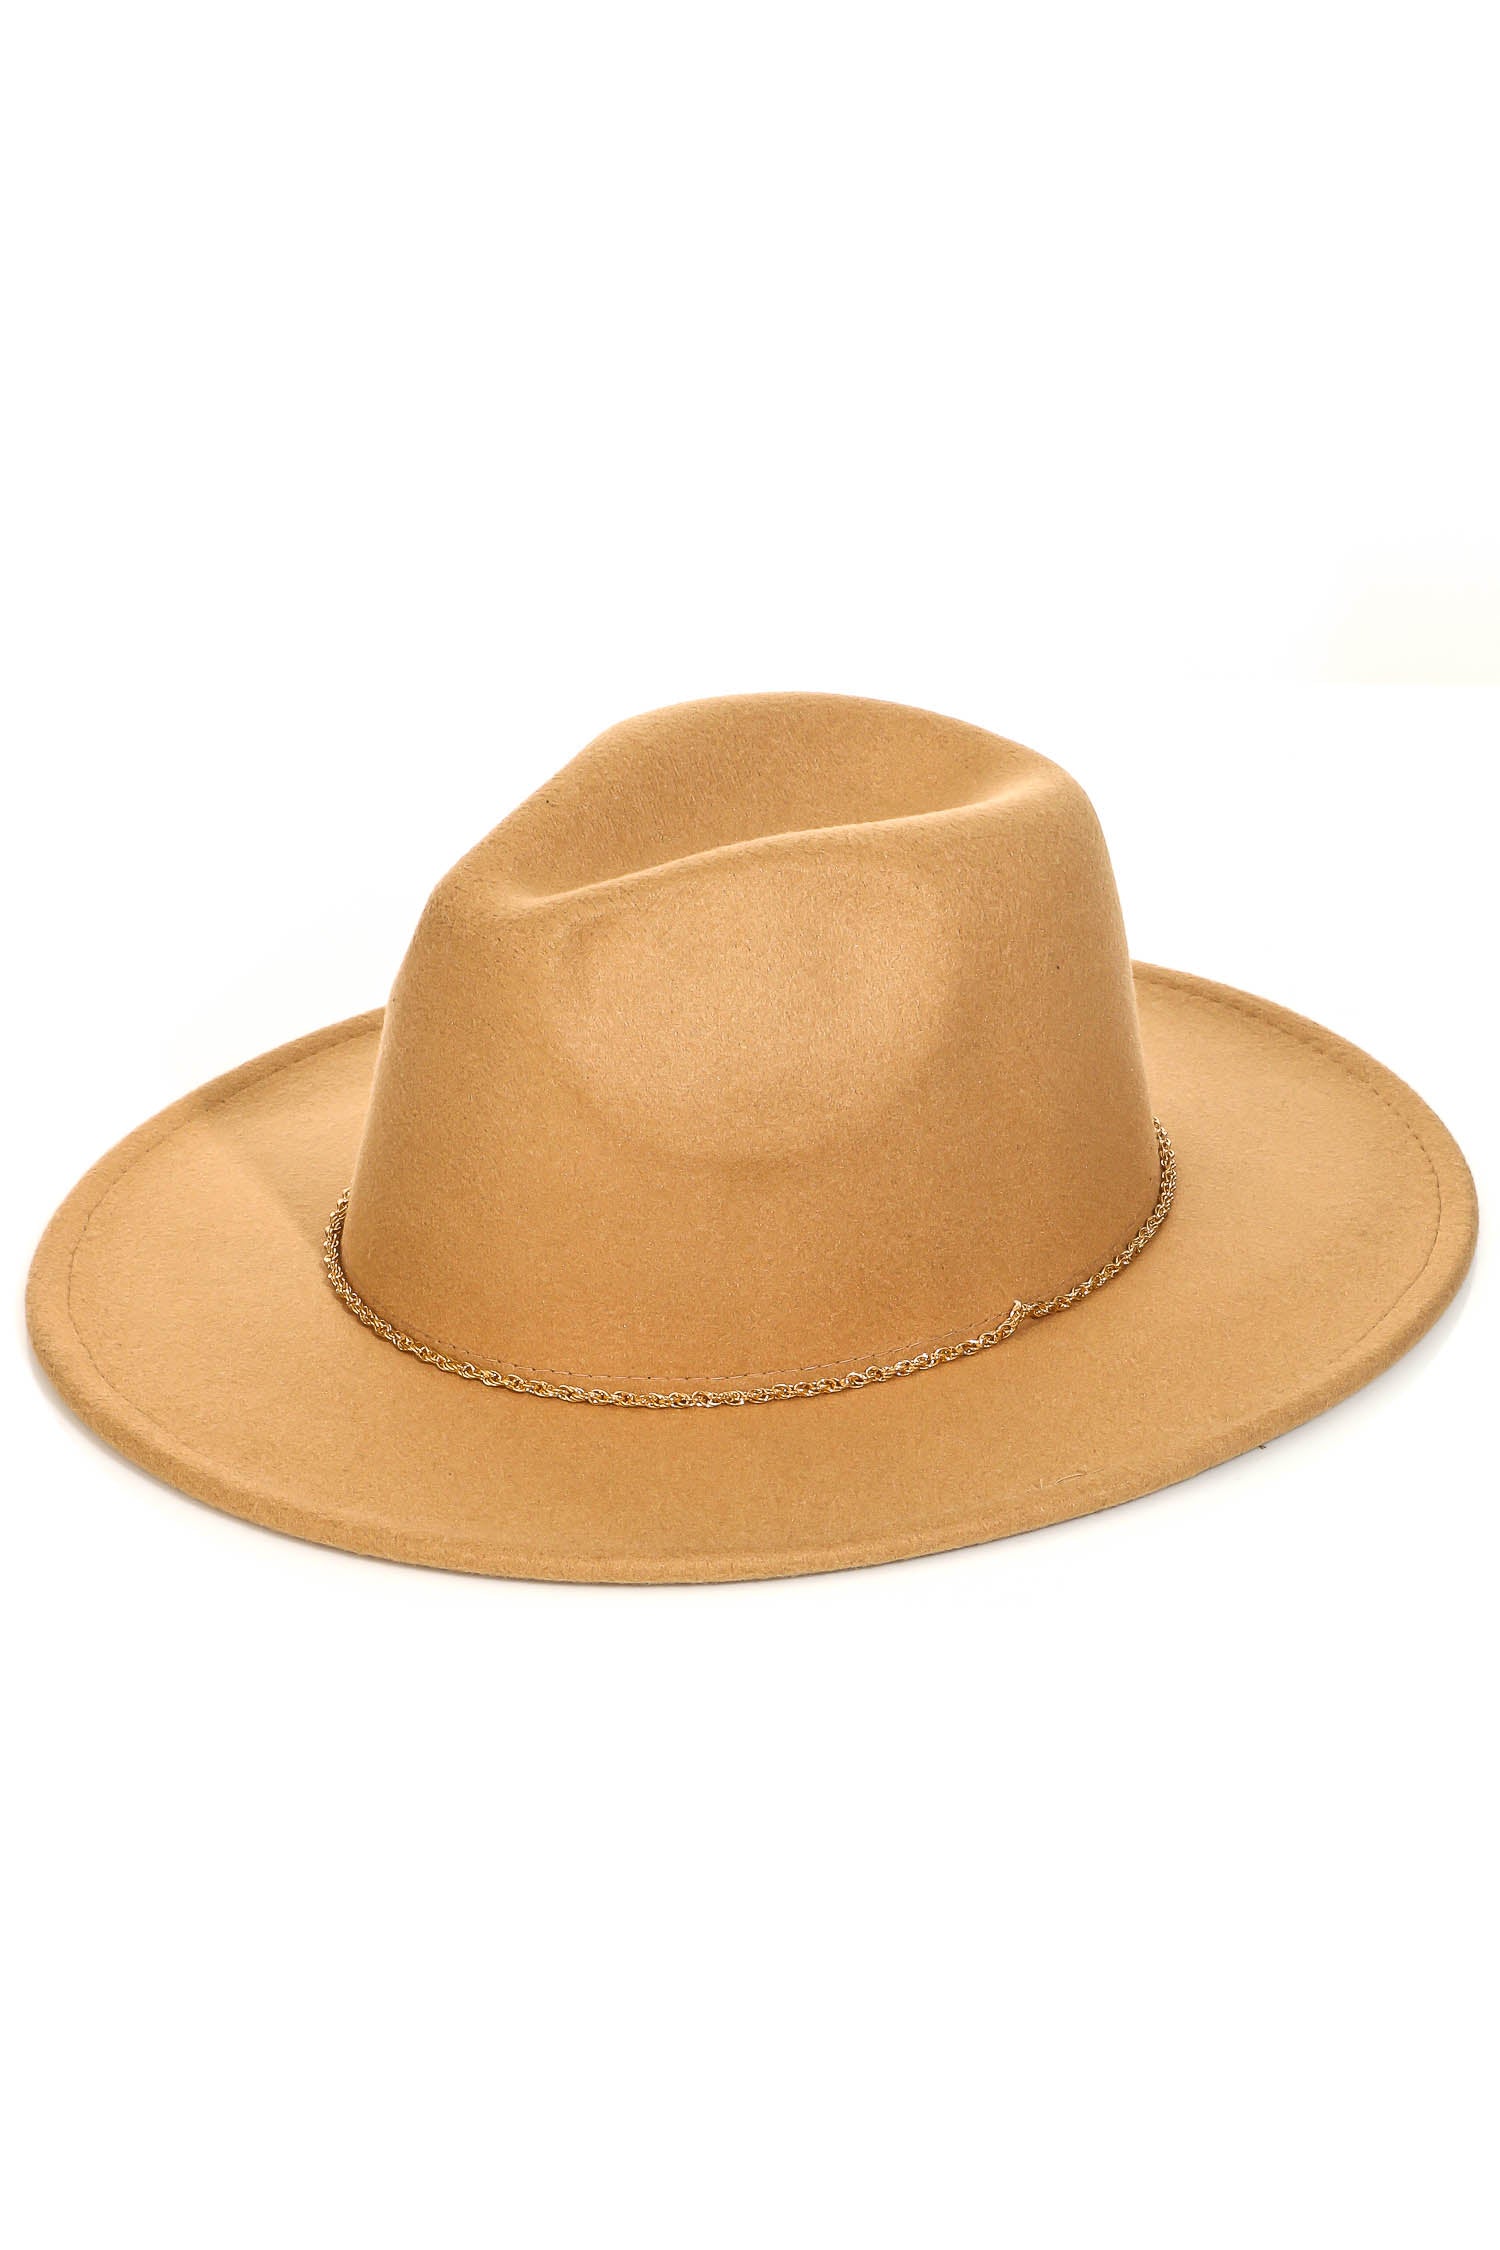 Gold Rope Chain Fedora Hat - Offbeat Boutique